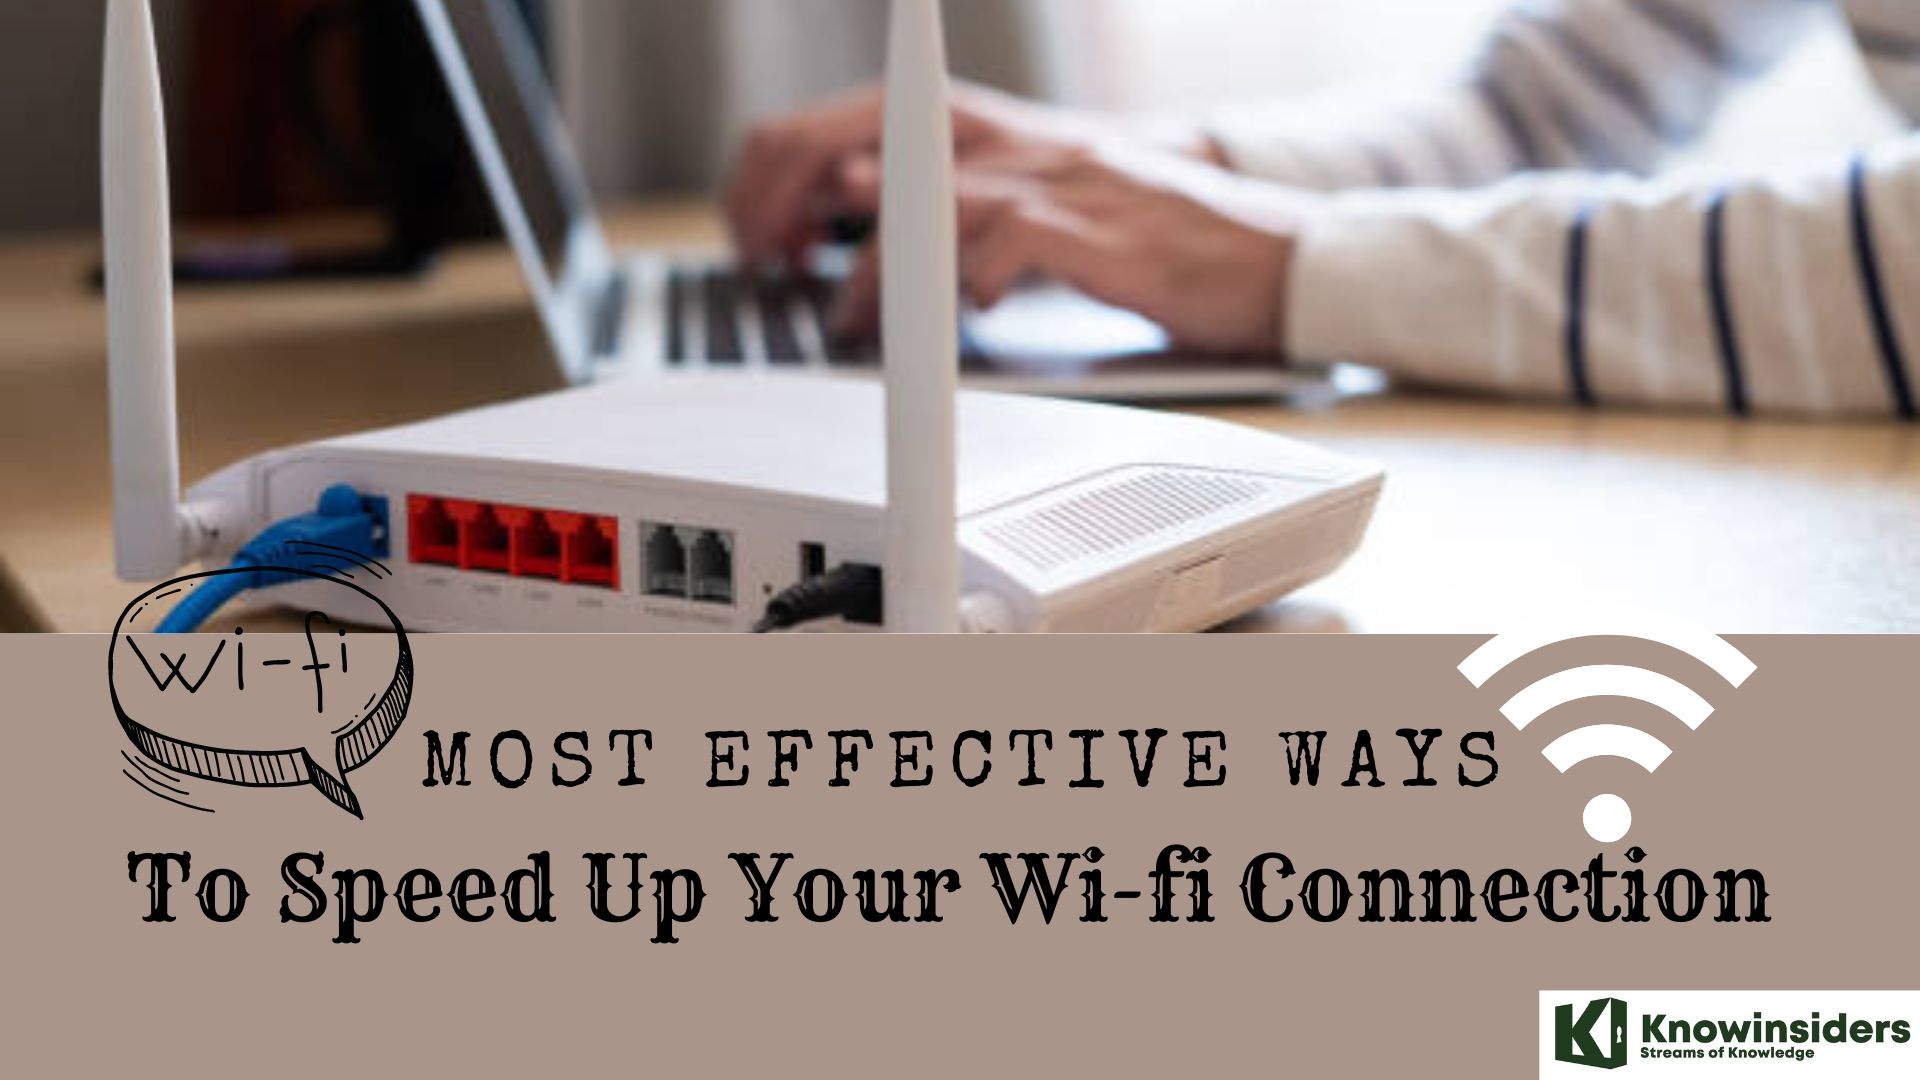 10 Simple Ways To Speed Up Your Wi-fi Connection at Home